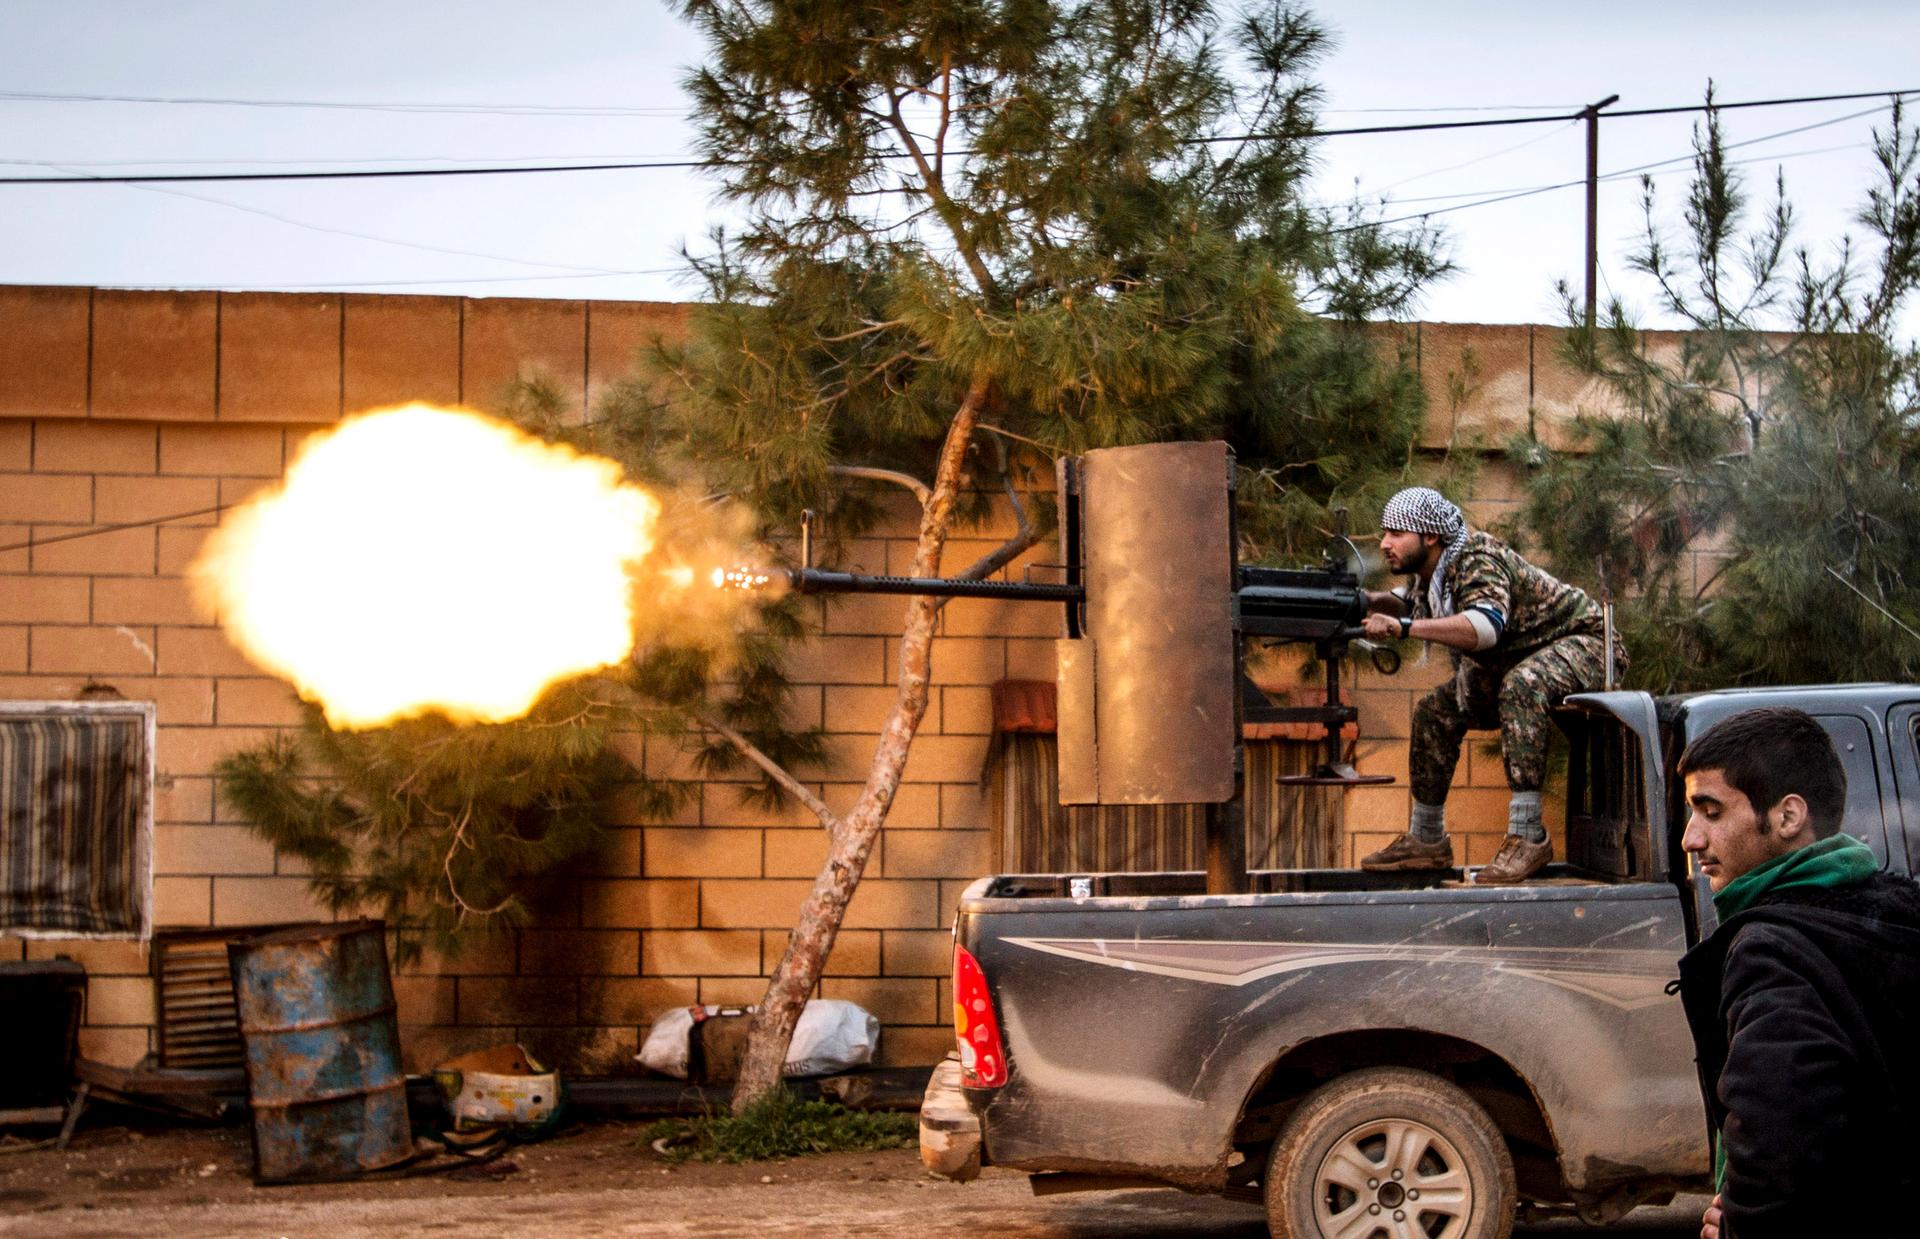 A fighter of the Kurdish People's Protection Units (YPG) fires an anti-aircraft weapon from Tel Tawil village in the direction of Islamic State fighters positioned in the countryside of the town of Tel Tamr in 2015.